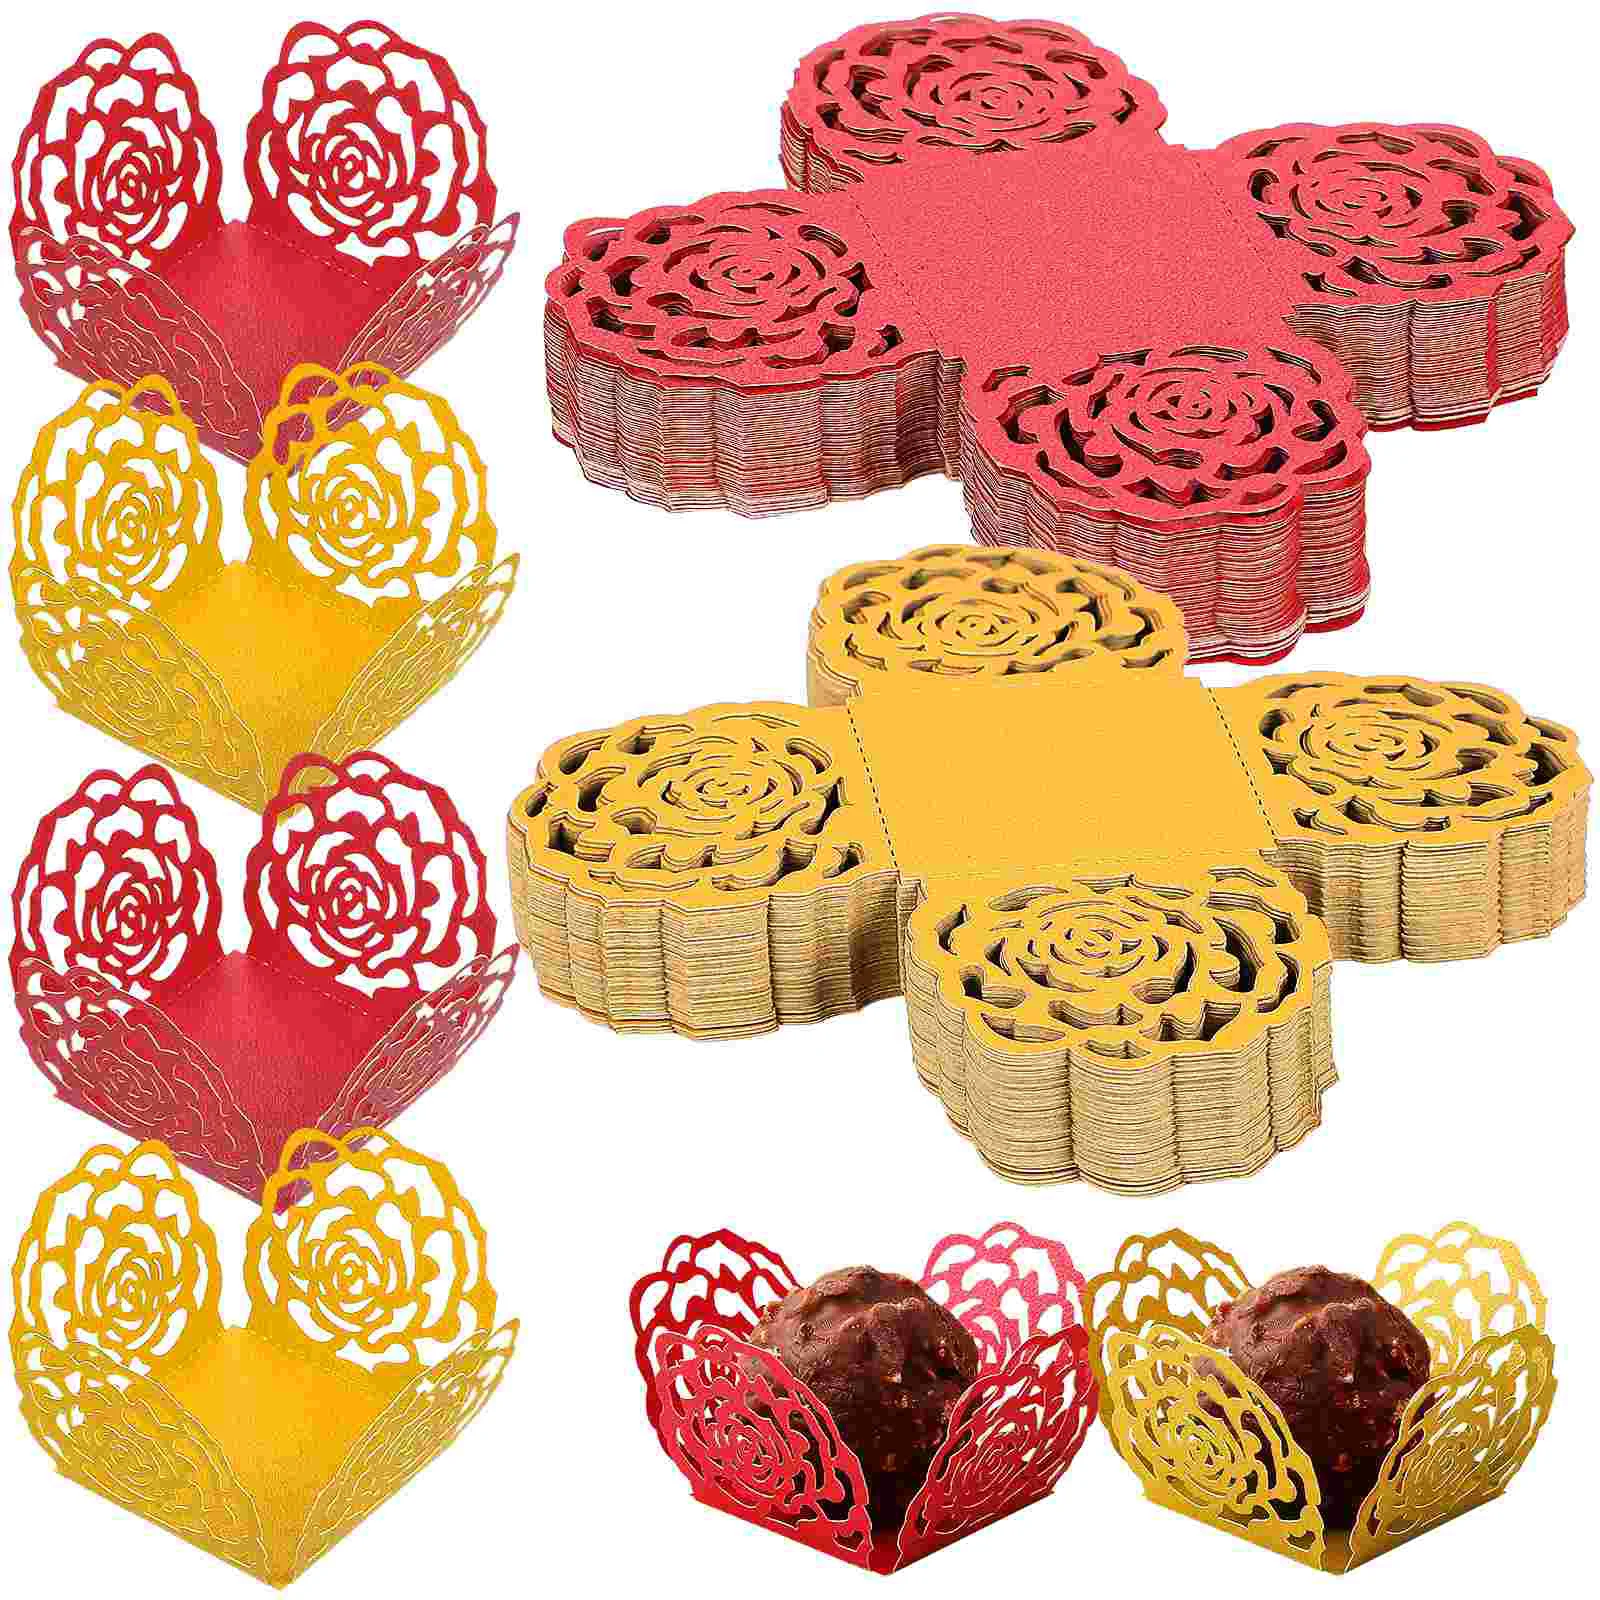 

100 Pcs Wedding Decorations Ceremony Chocolate Candy Cups Liners Truffle Wrappers Paper Dessert Cake